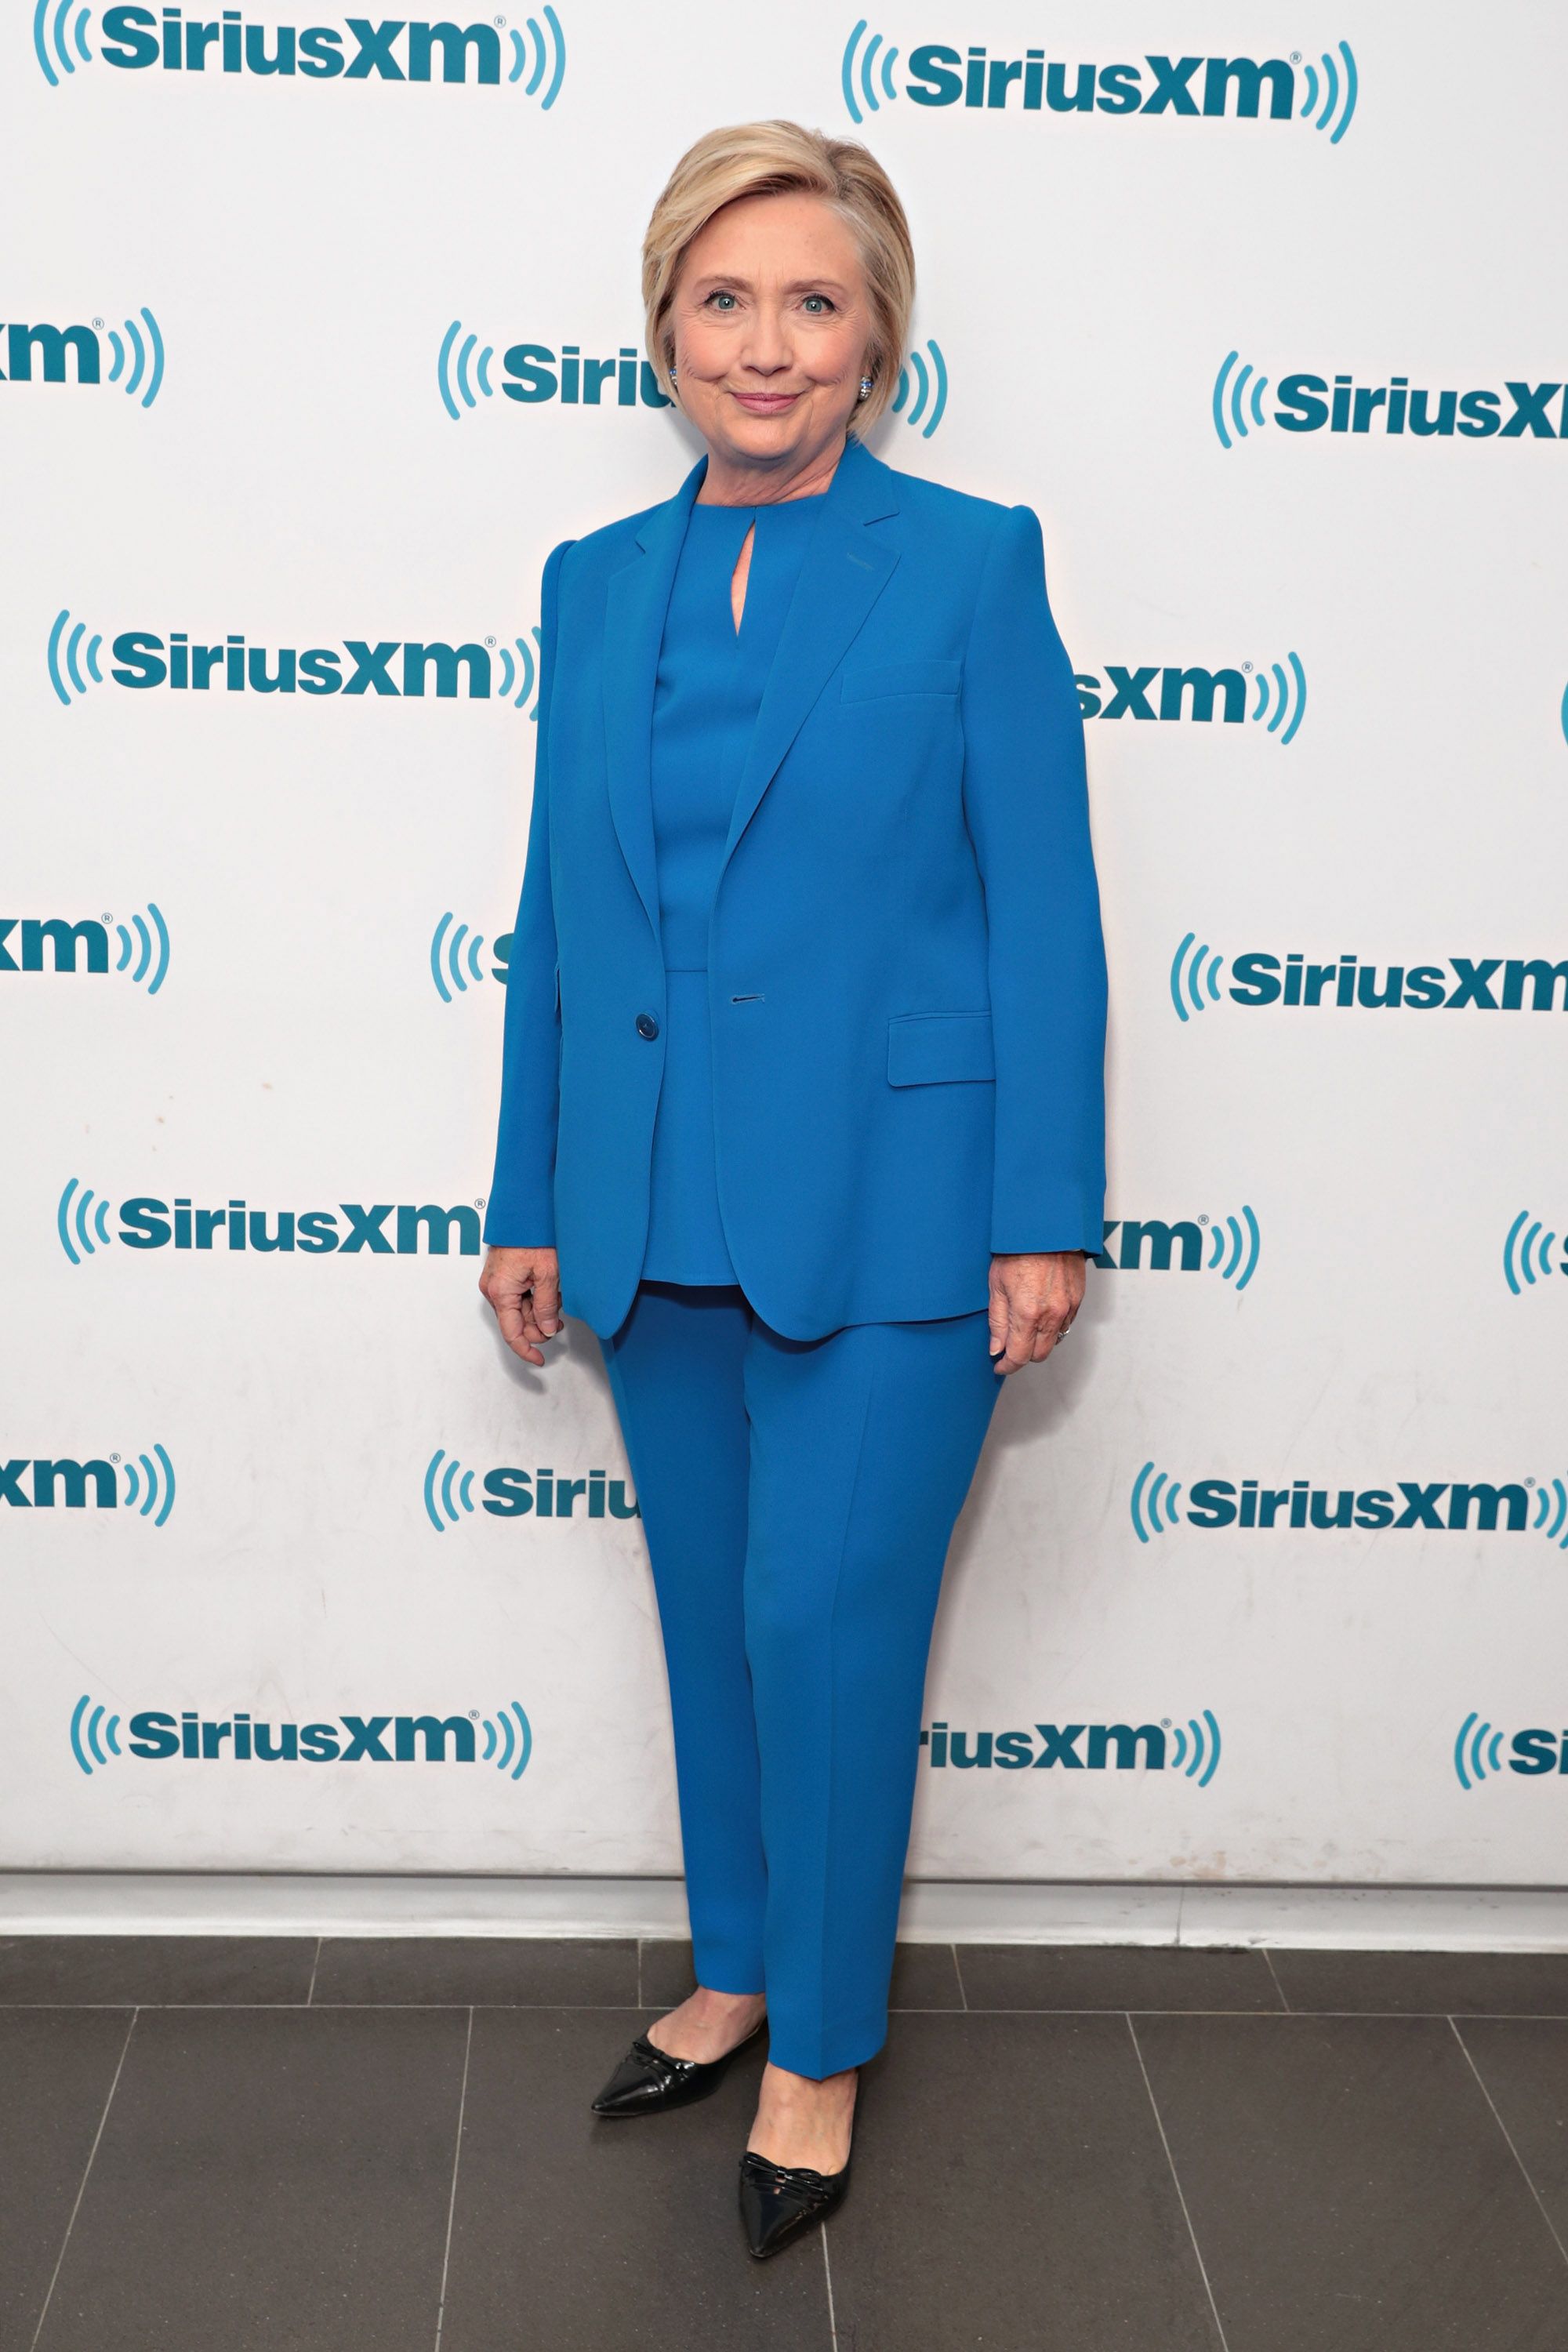 Cold shoulder: Hillary Clinton's dress and how it influenced fashion, Fashion